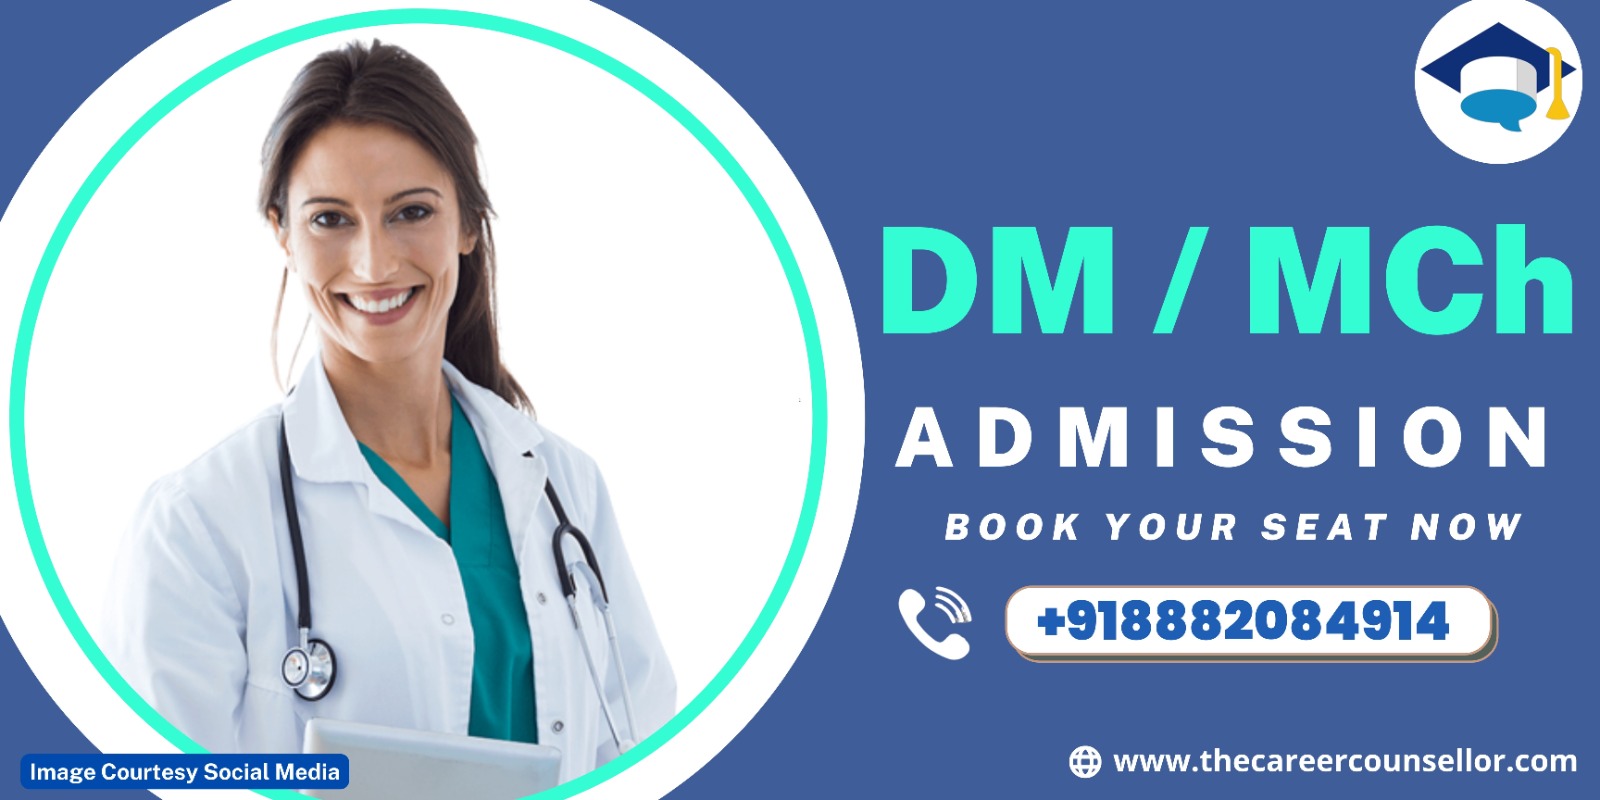 DM MCh Admission - The Career Counsellor